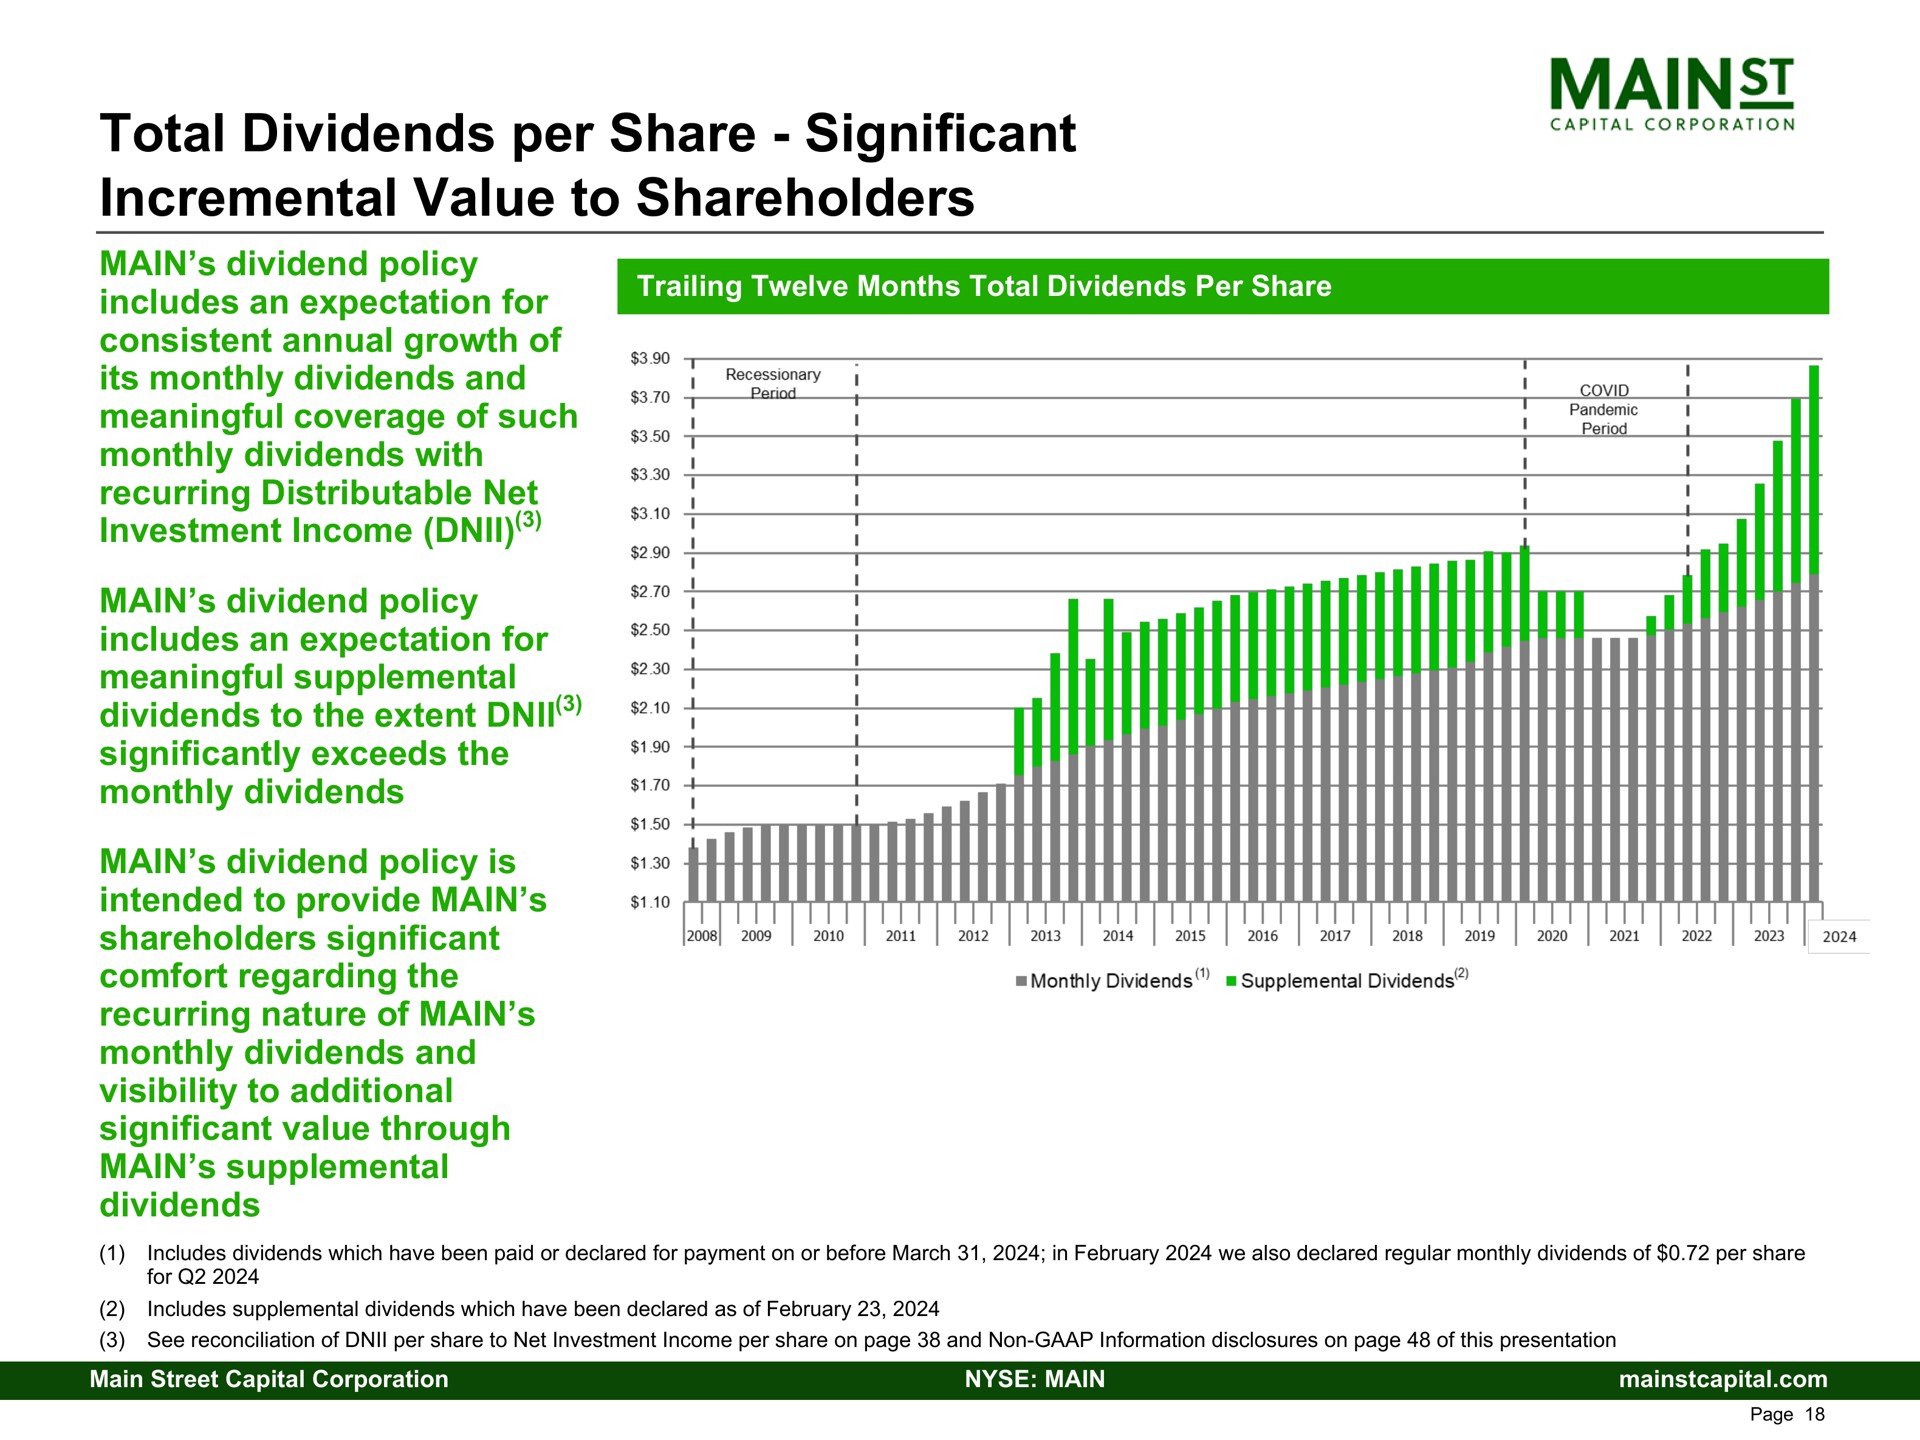 total dividends per share significant incremental value to shareholders investment income i on tod an expectation for includes fee eyelet soe cee significantly exes main dividend fat intended prove man | Main Street Capital